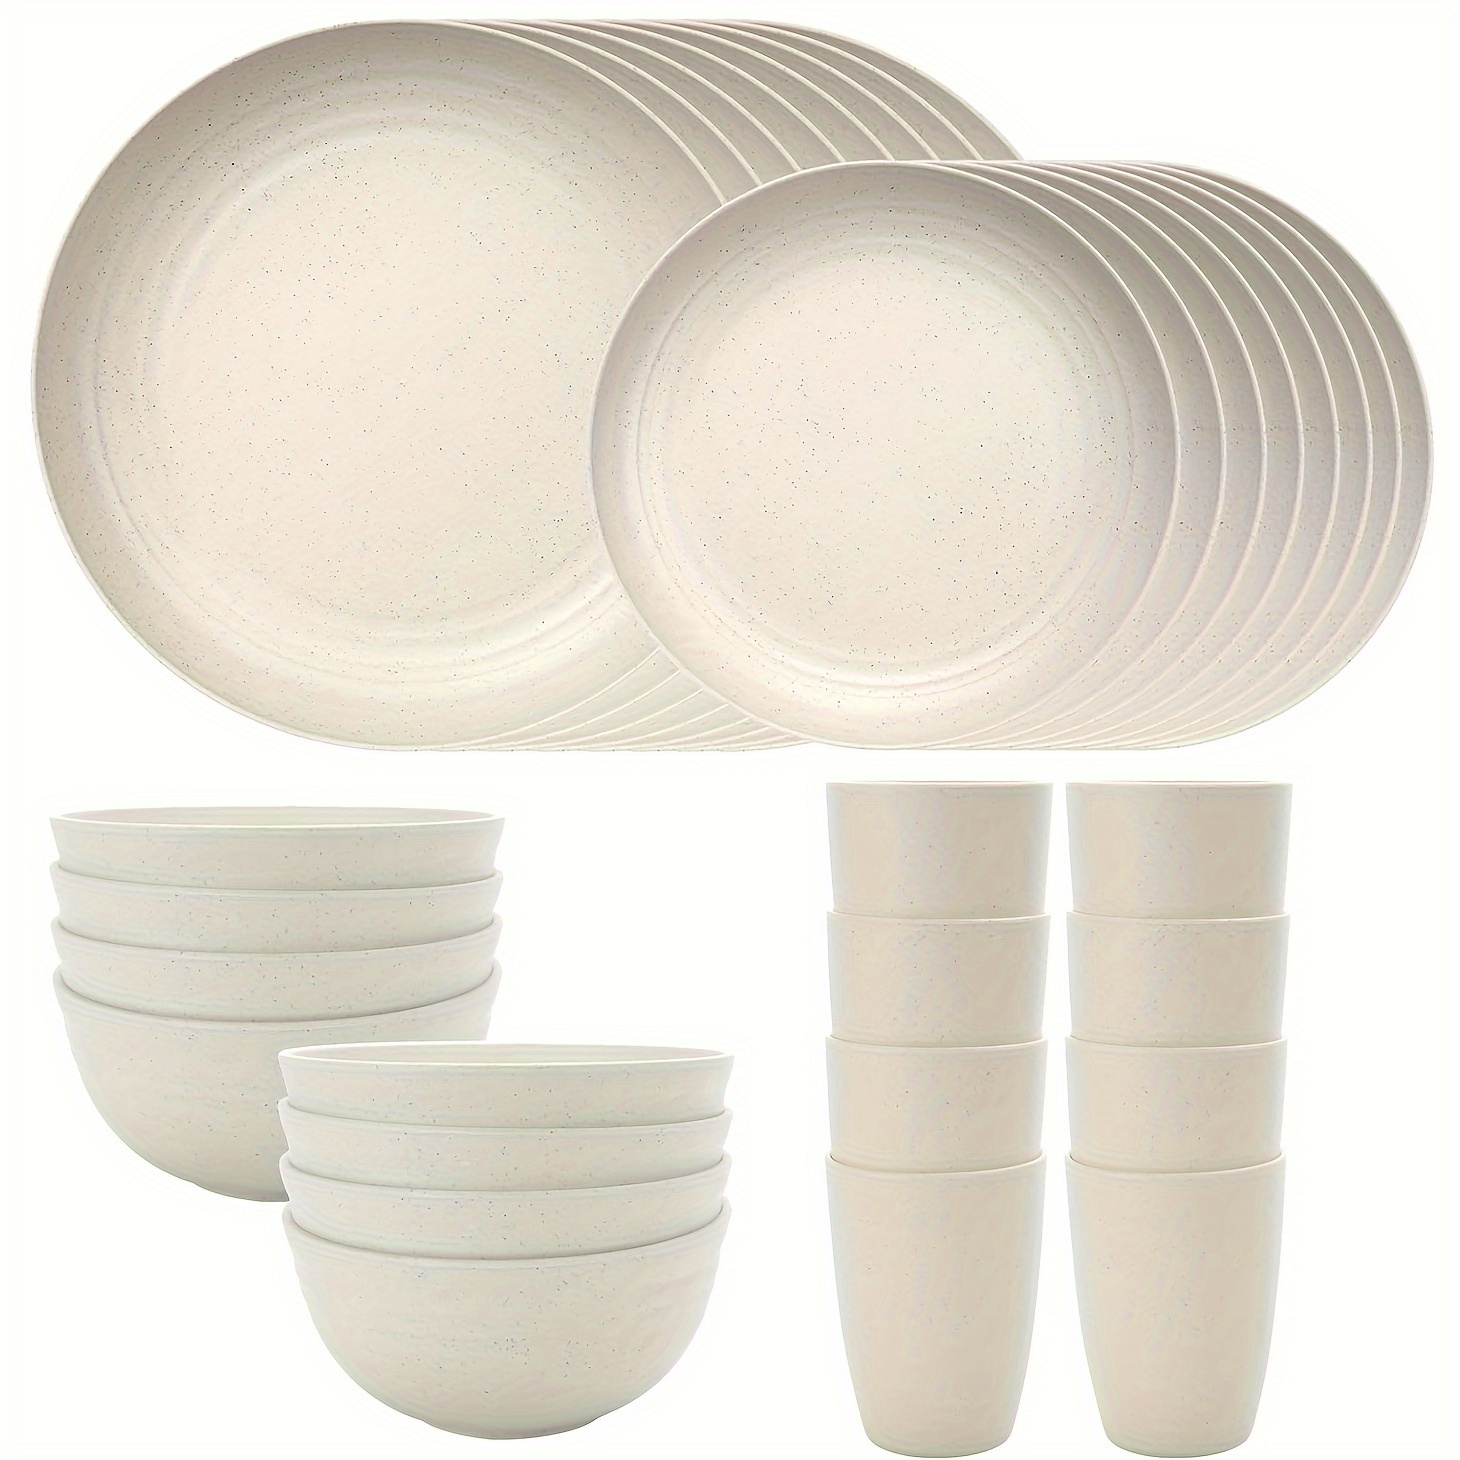 

32-piece Premium Pp Plastic Dinnerware Set, Unbreakable Plates, Bowls, Cups, Beige, Solid Pattern, Holiday Theme, Round Shape, Microwave And Dishwasher Safe, Ideal For Indoor And Outdoor Camping Use.